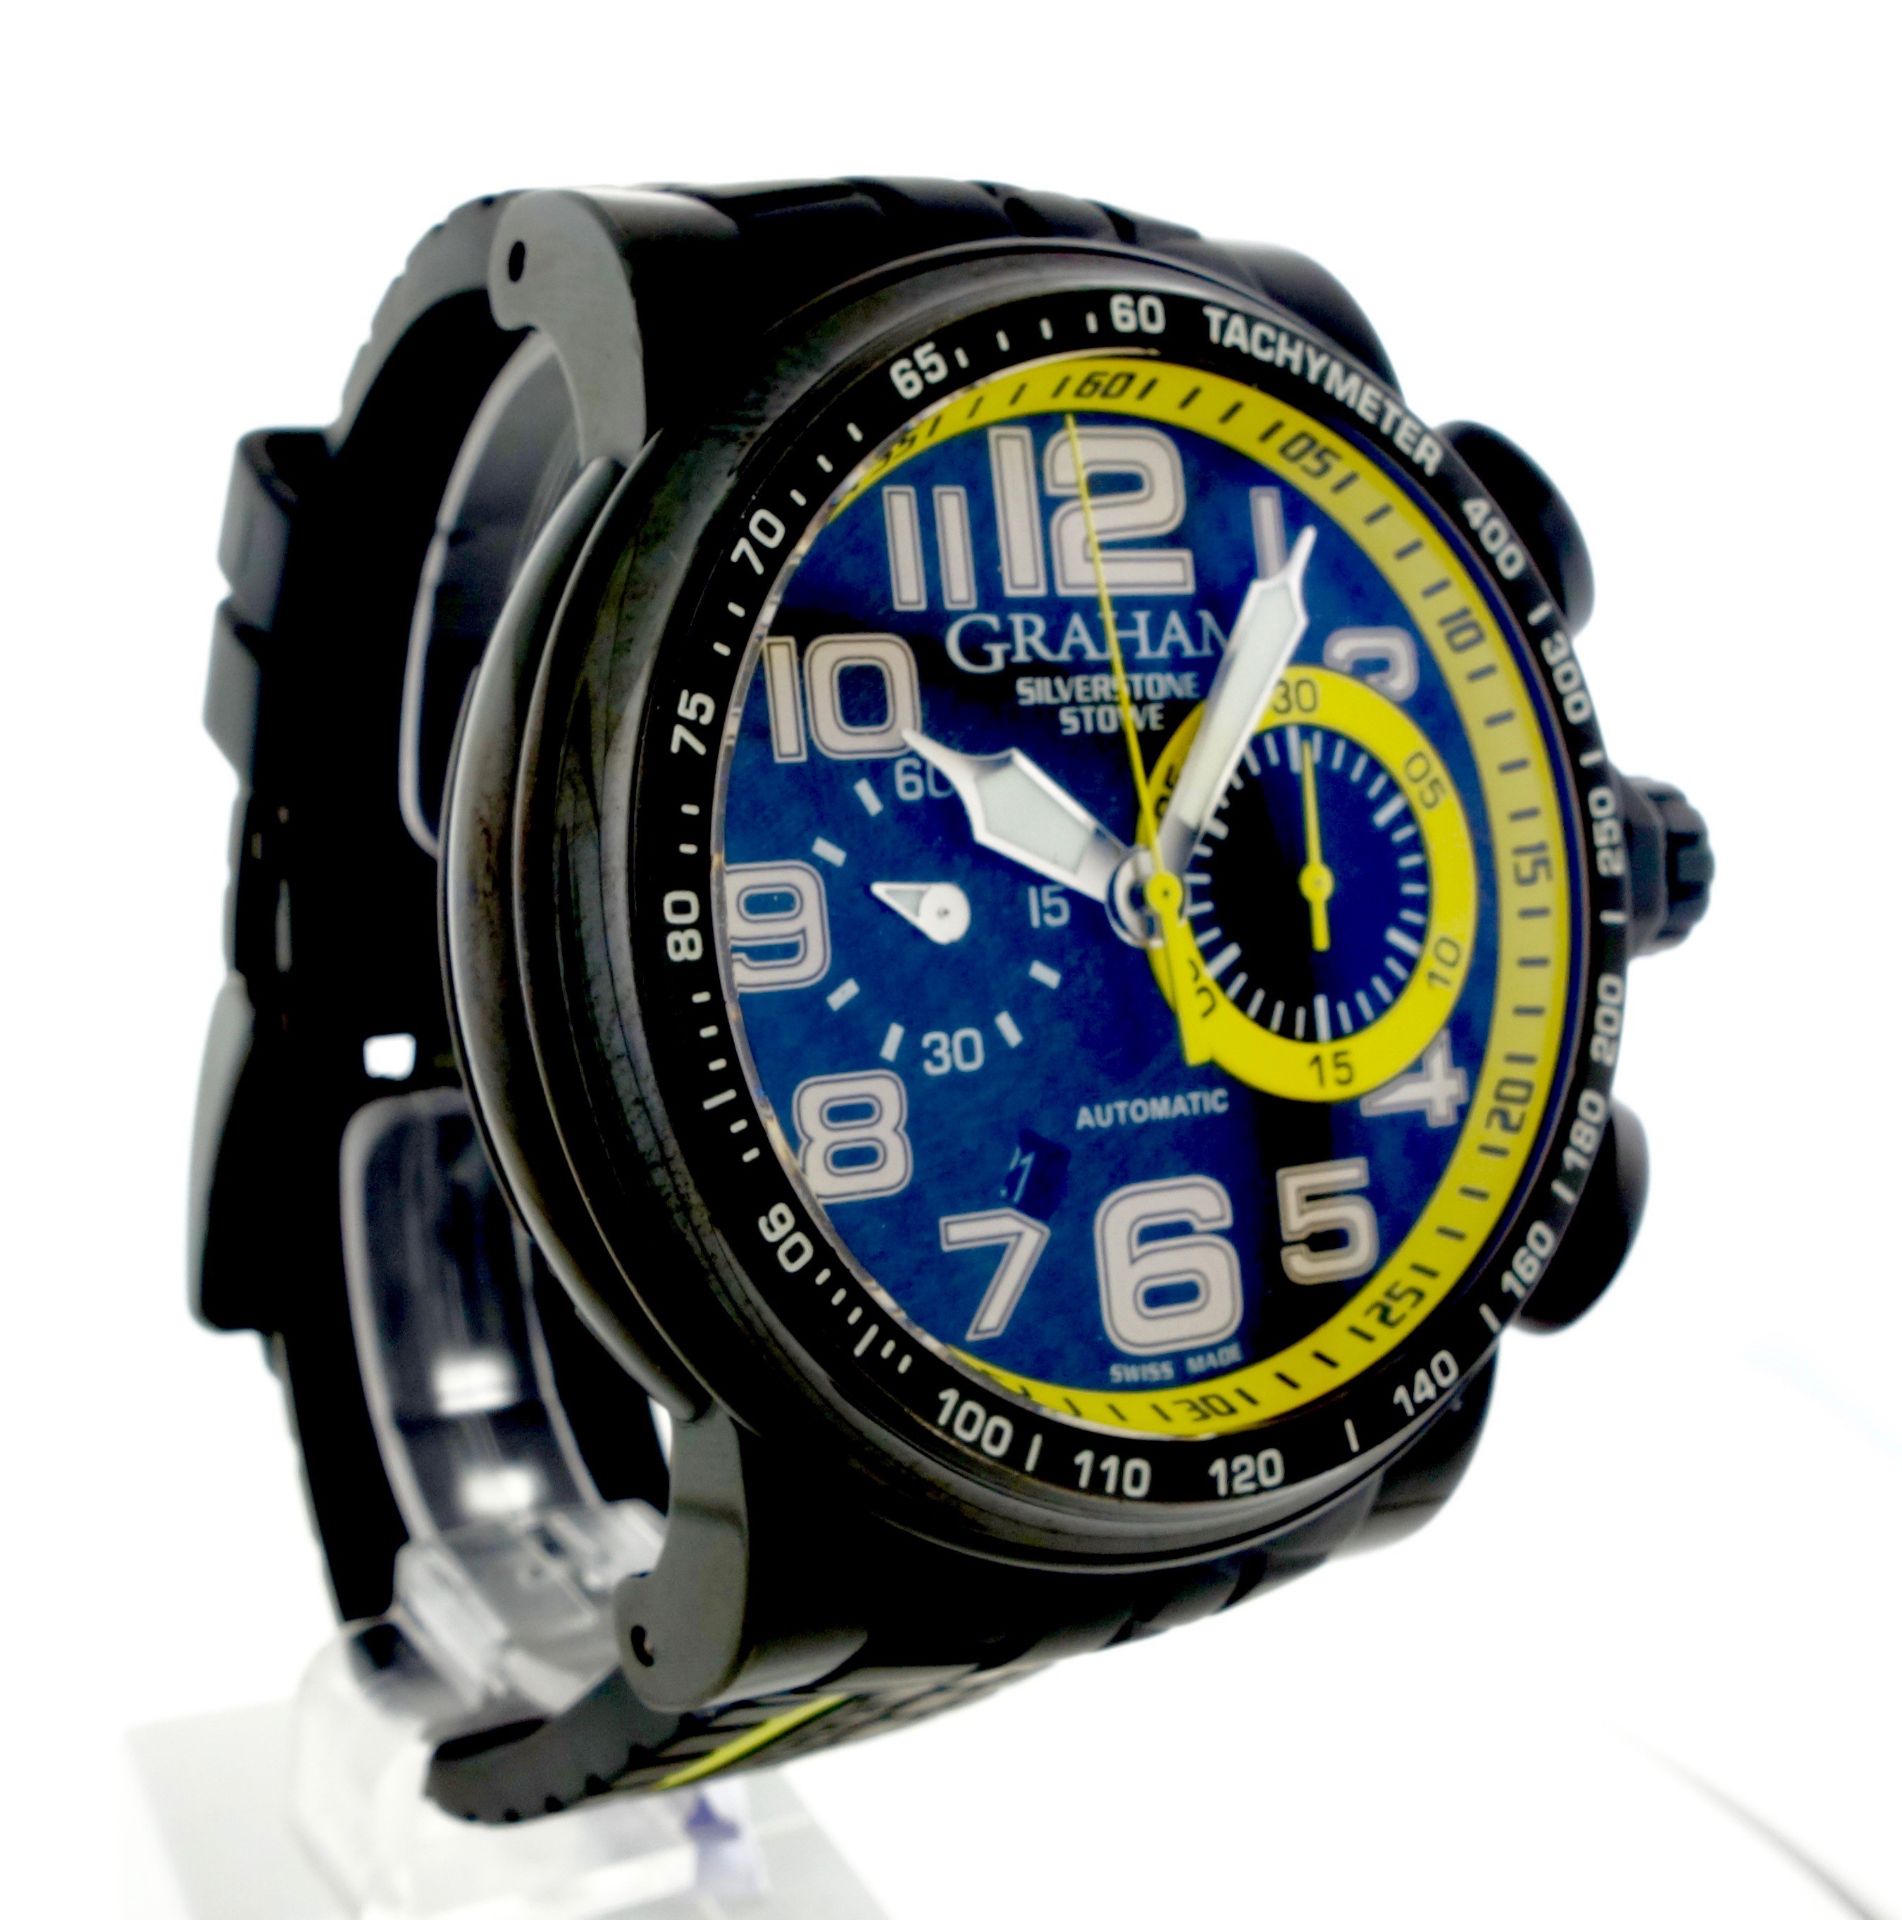 2012 Gents Graham Silverstone Racing Watch - 2BLDC.B28A - Image 2 of 4